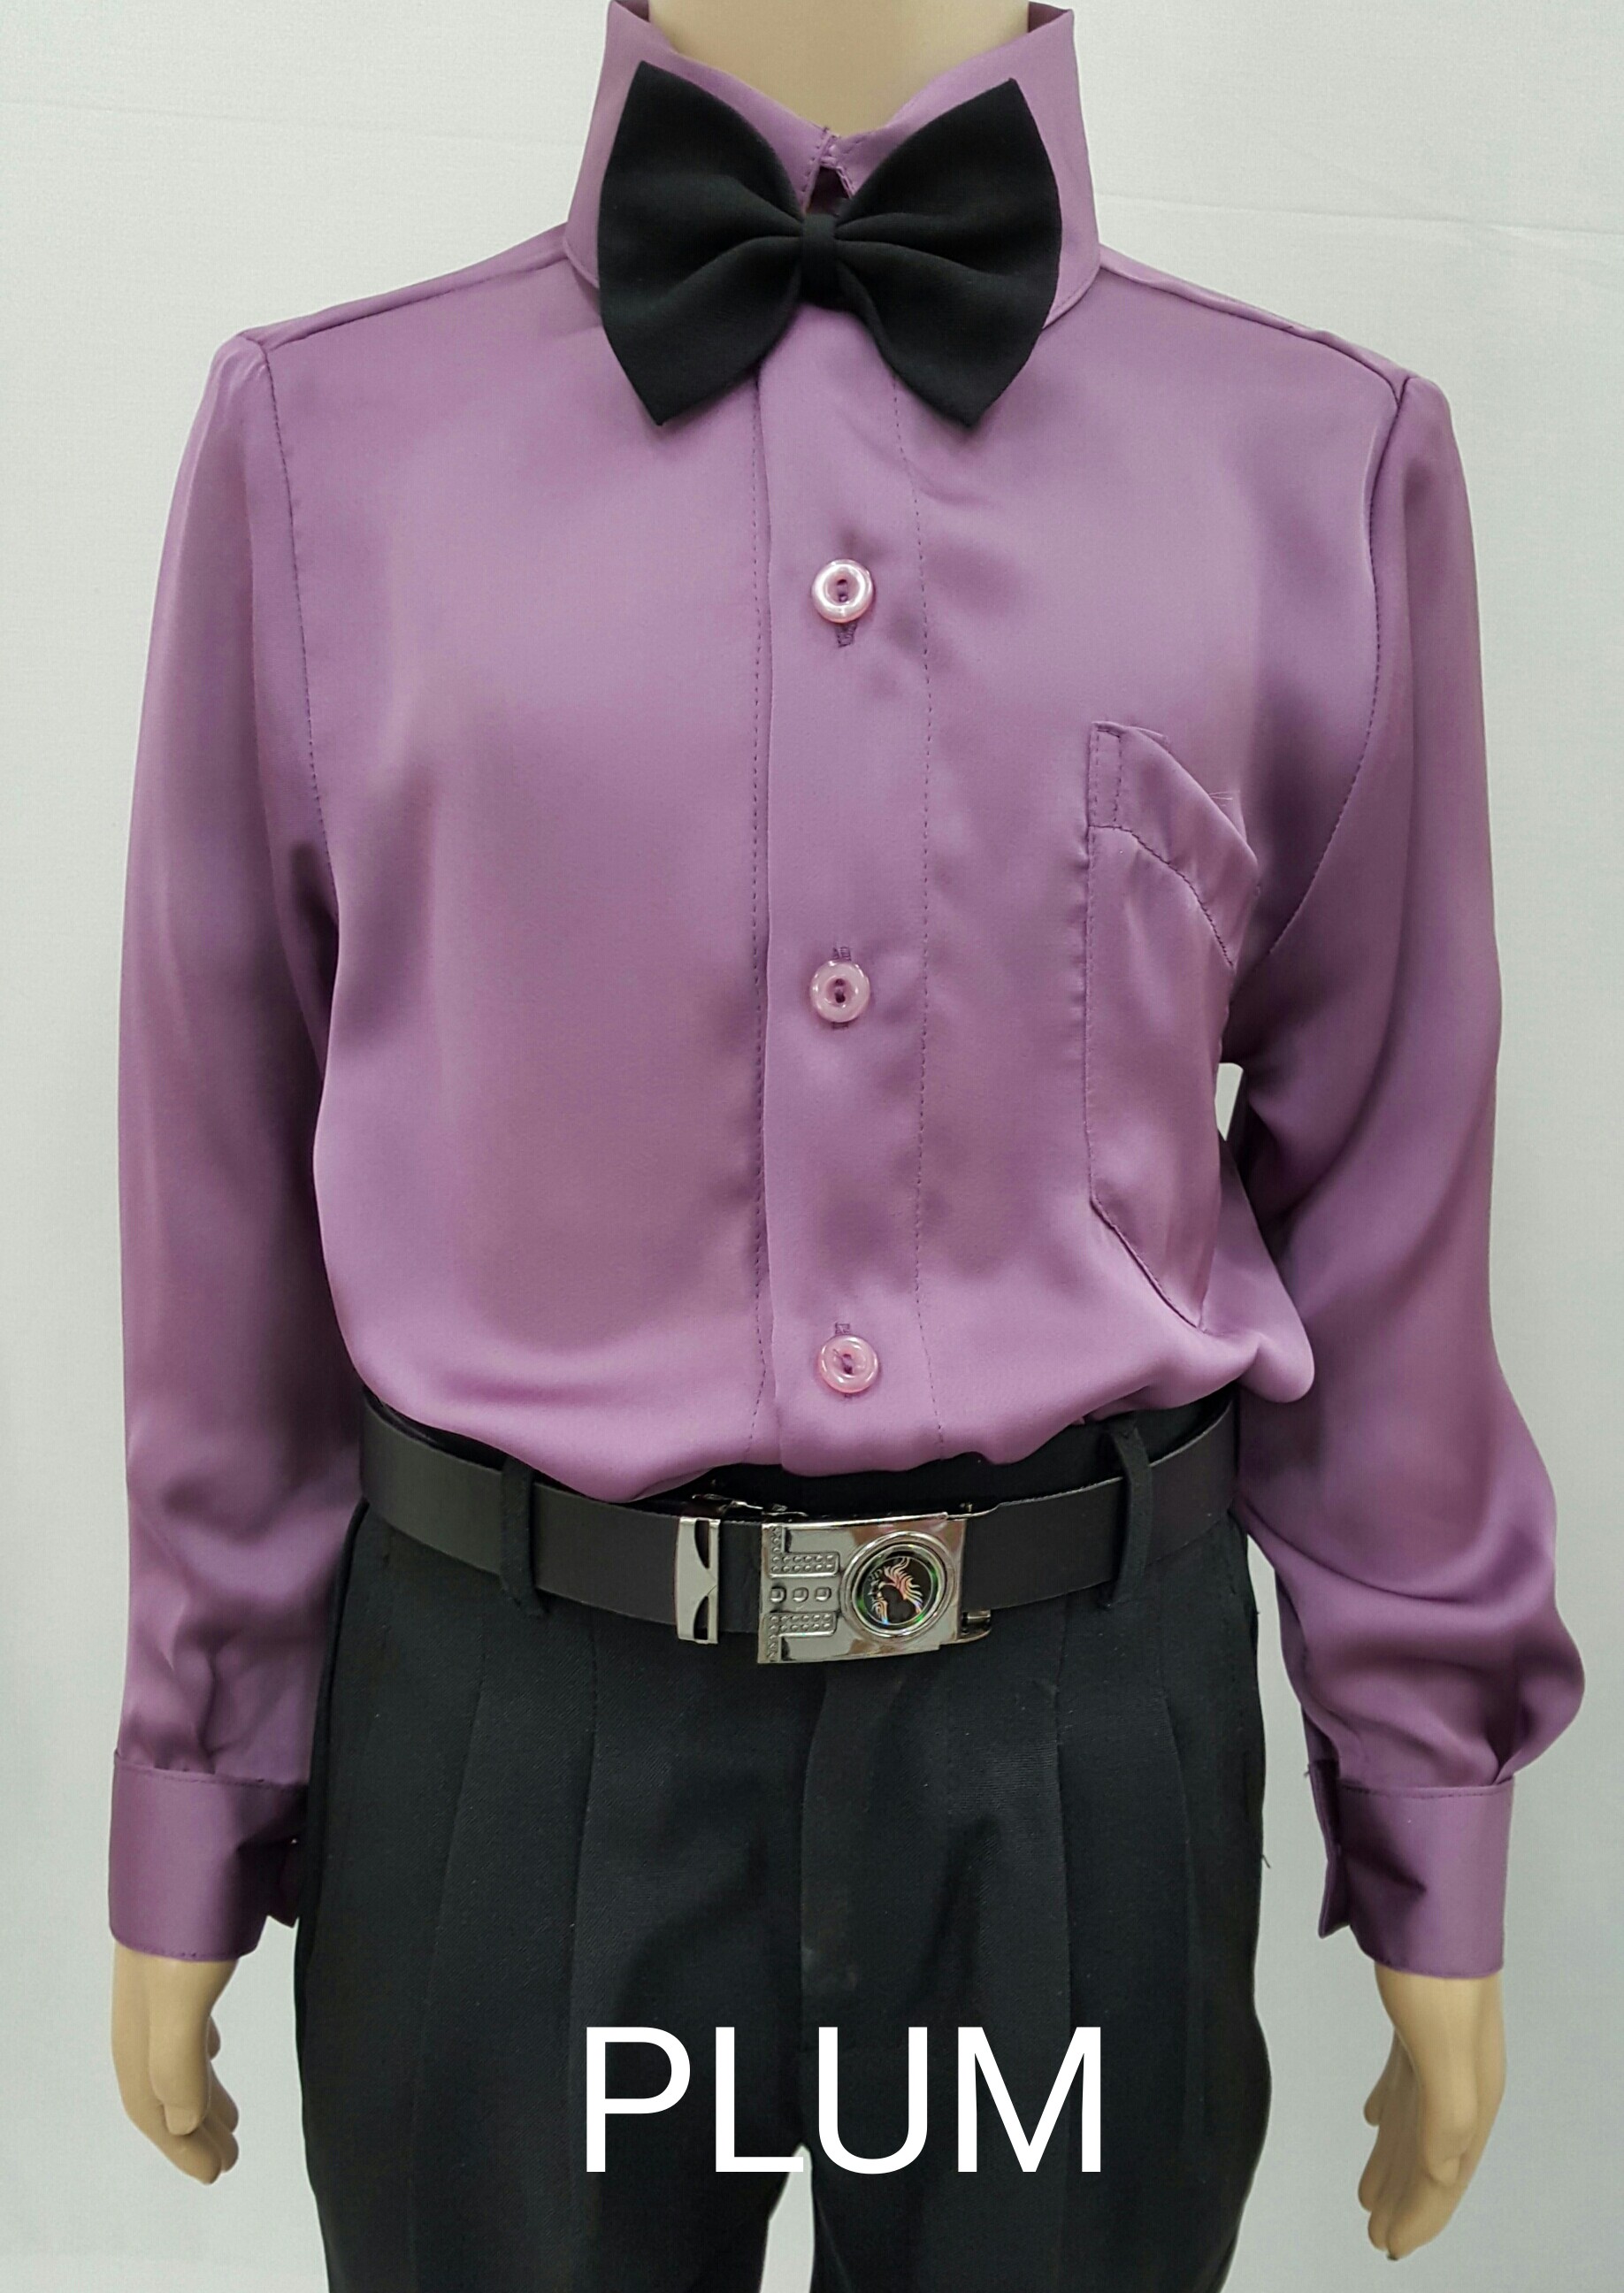 Boys Polyester Shirt BS02 [BS02] - $10.00 : Plus Size Clothing ...